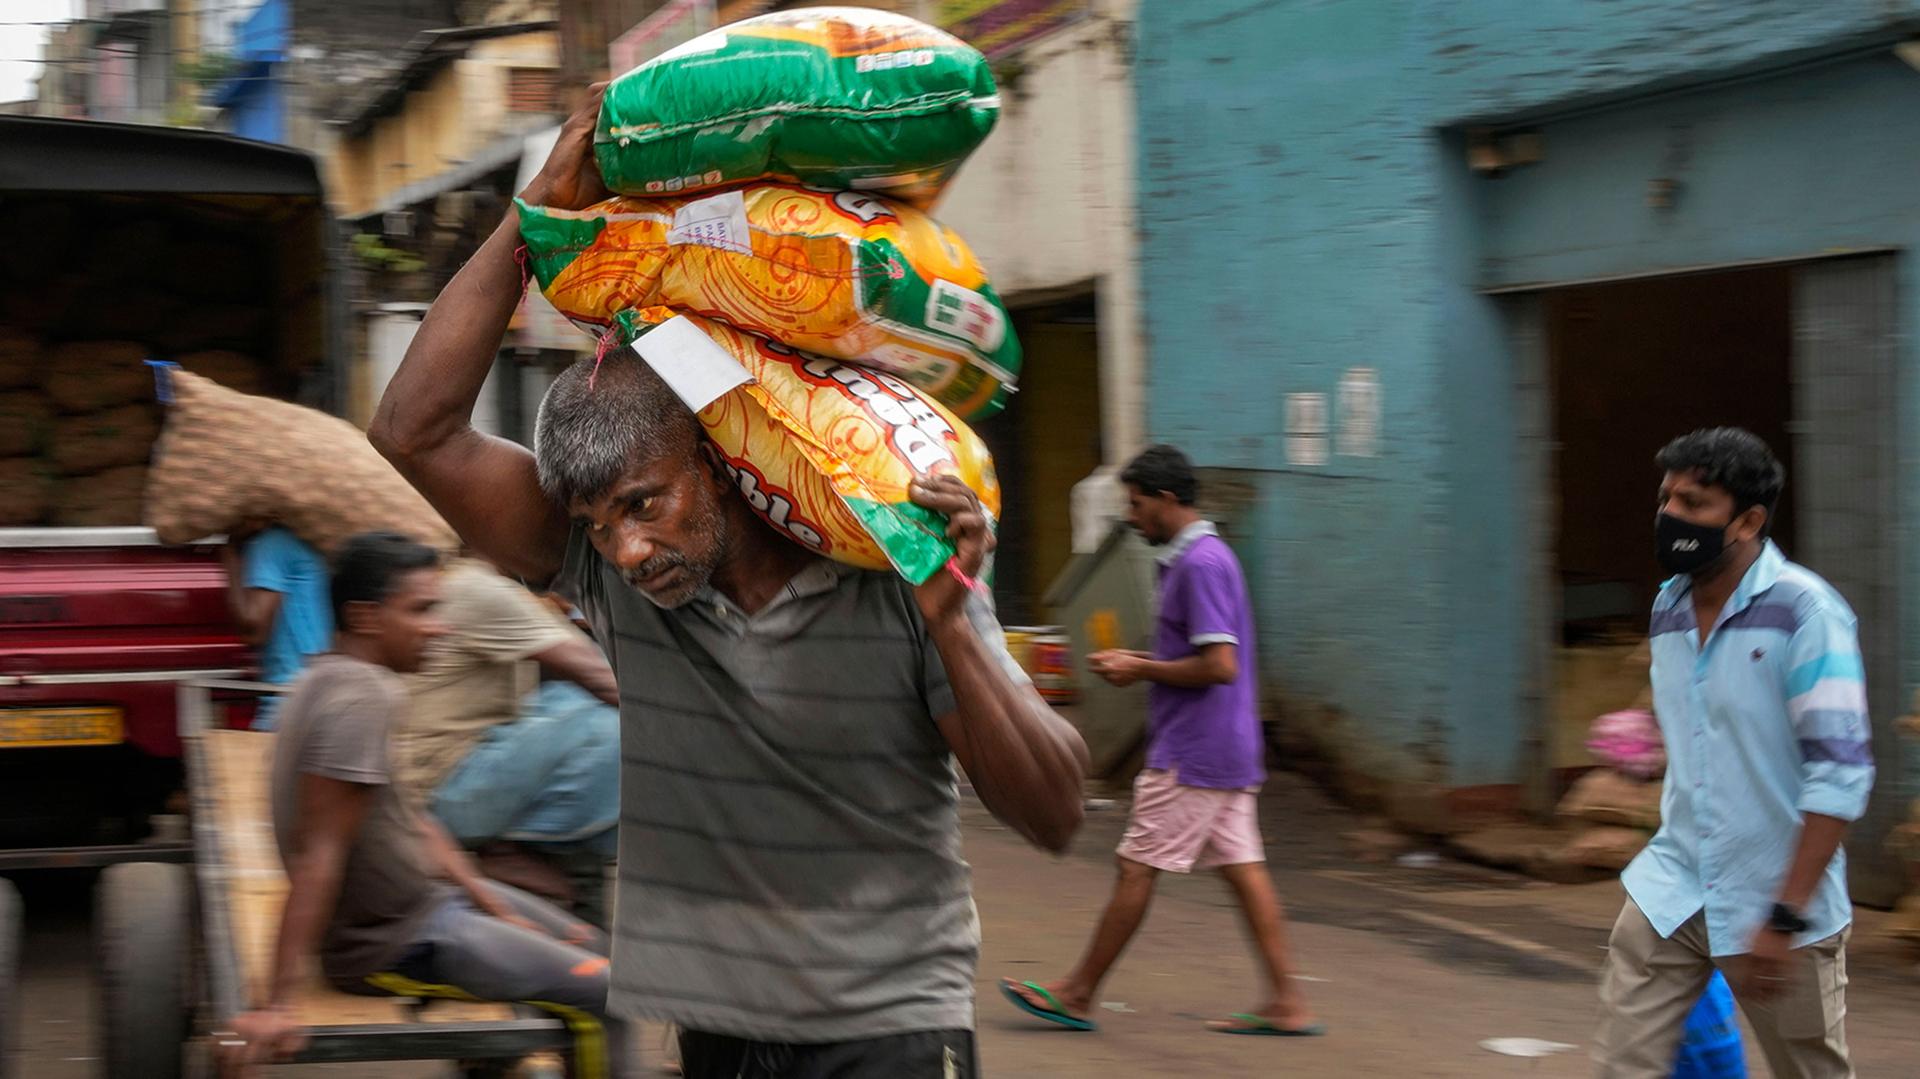 A porter carries sacks of imported food items at a market place in Colombo, Sri Lanka